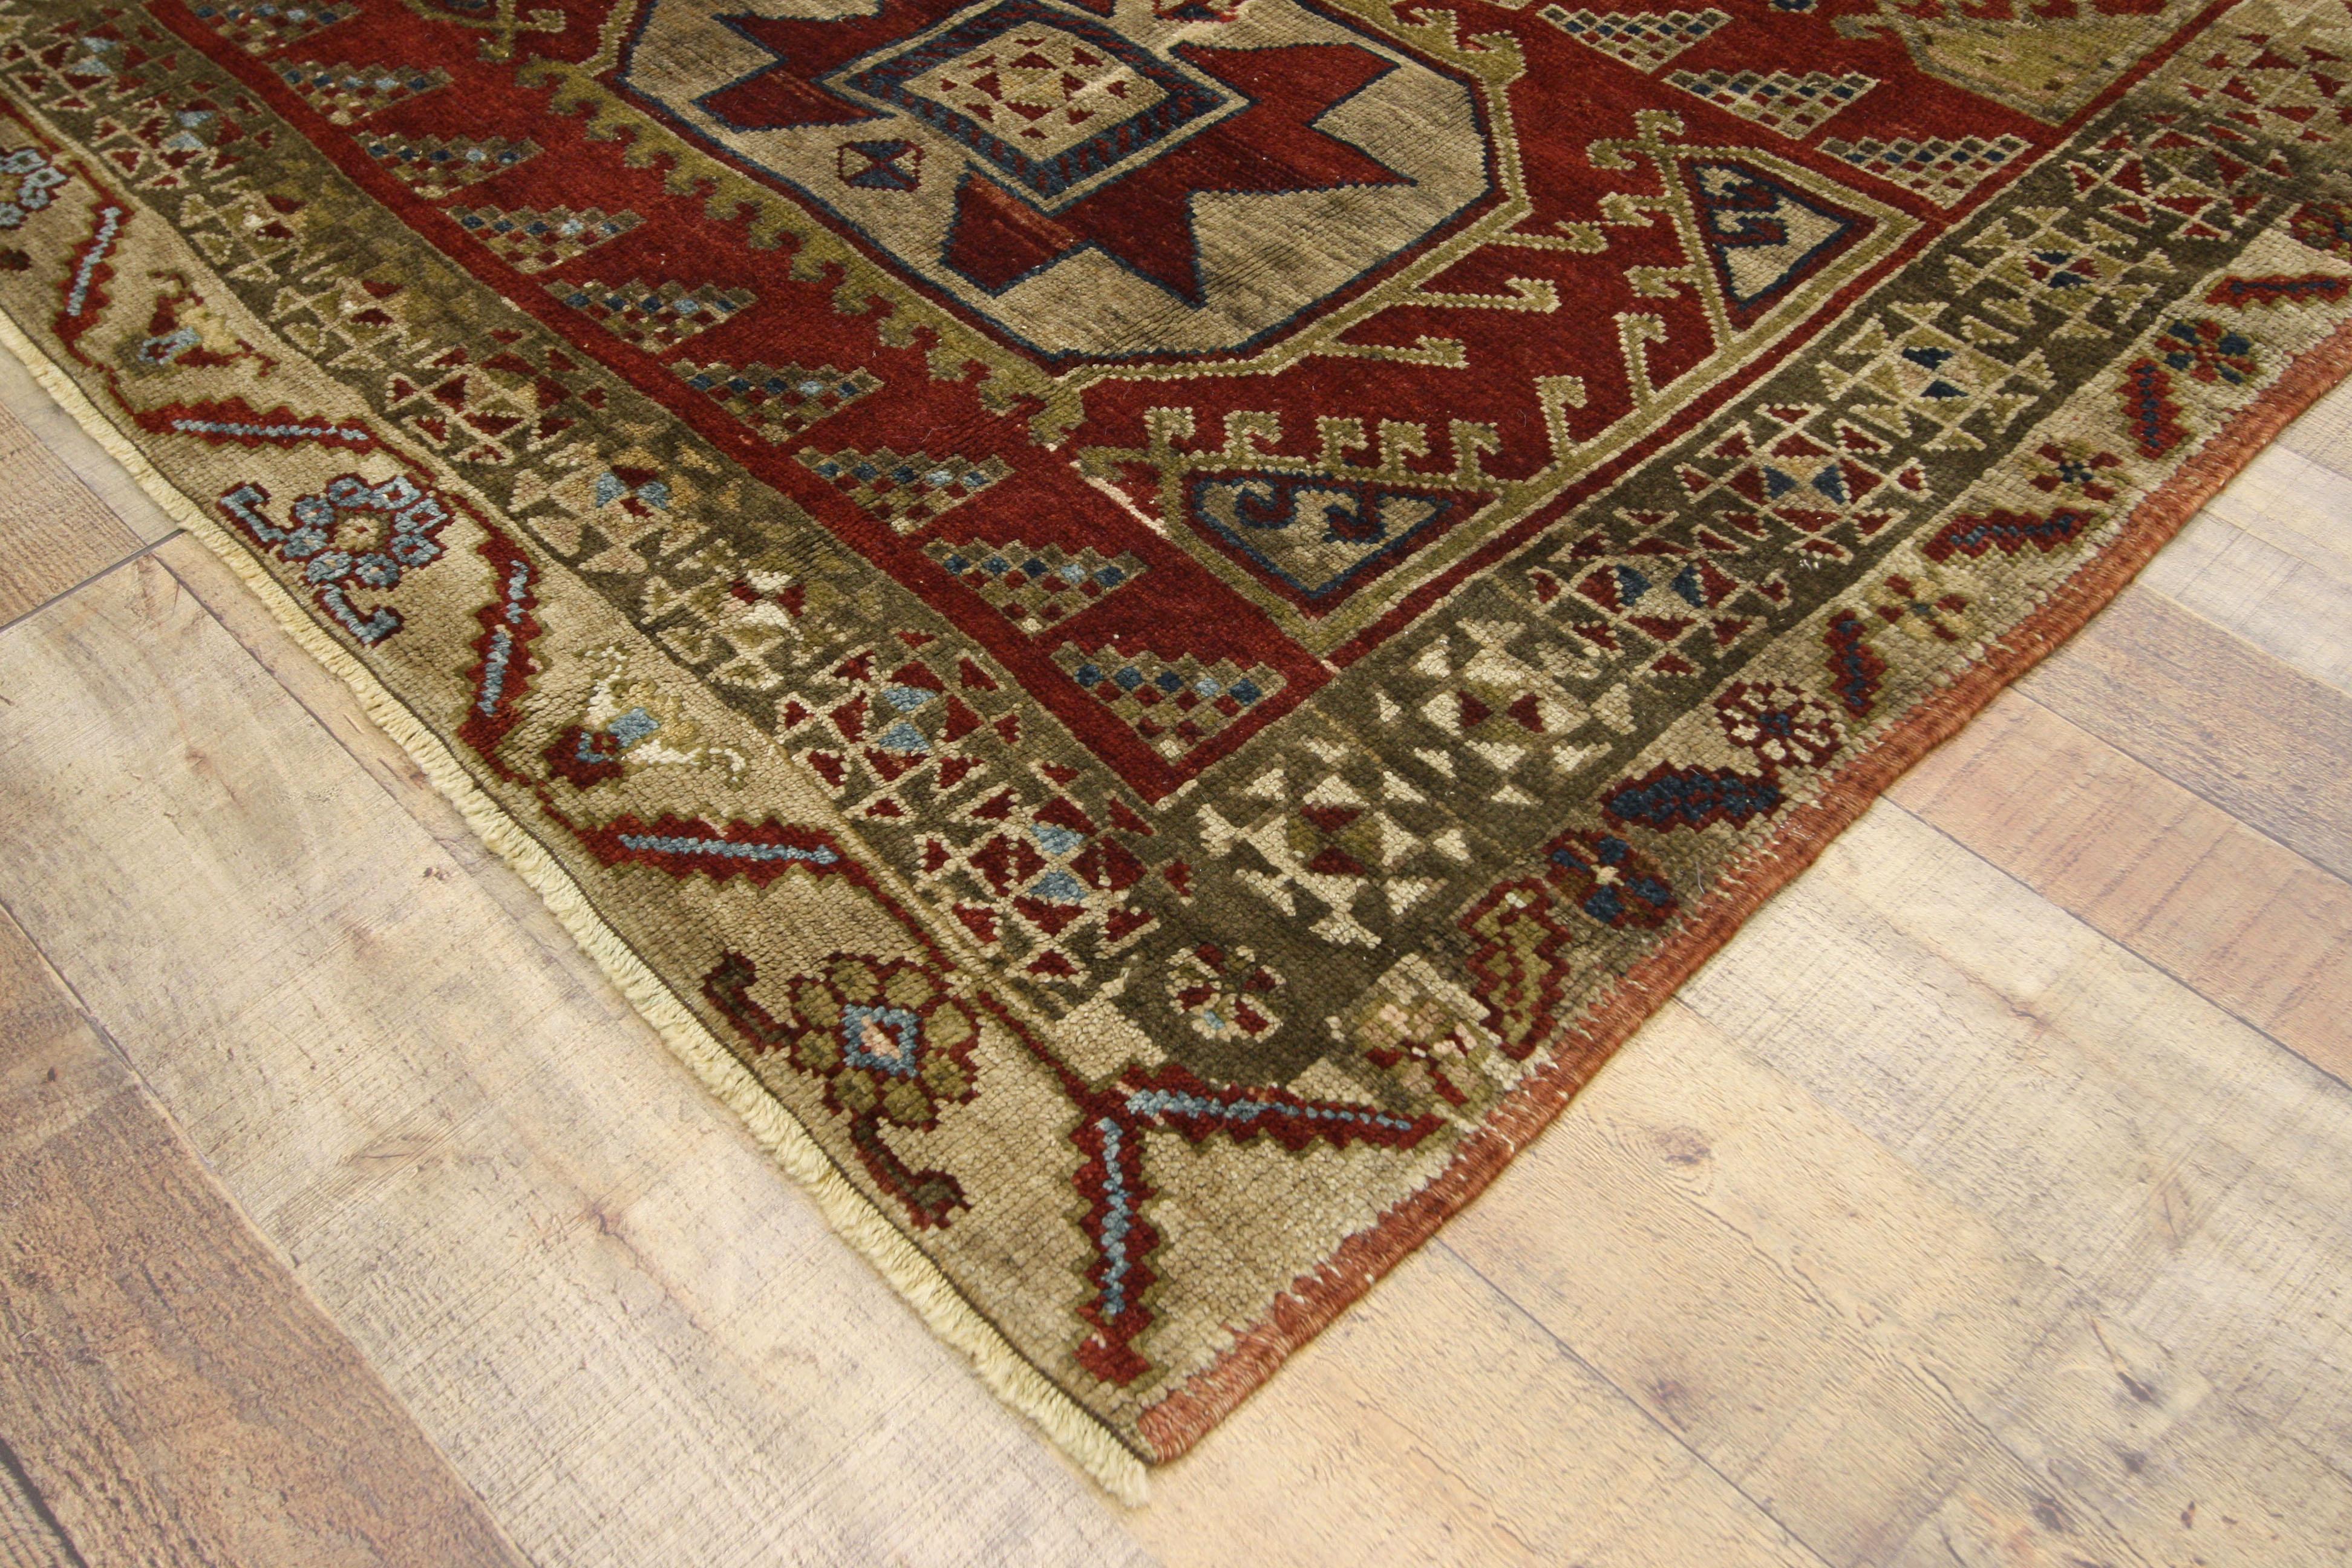 52398, vintage Turkish Oushak hallway runner with Art Deco Mission Style. This hand knotted wool vintage Turkish Oushak runner features a paneled design with five large latch-hooked hexagonal medallions spread across an abrashed ruby red field.